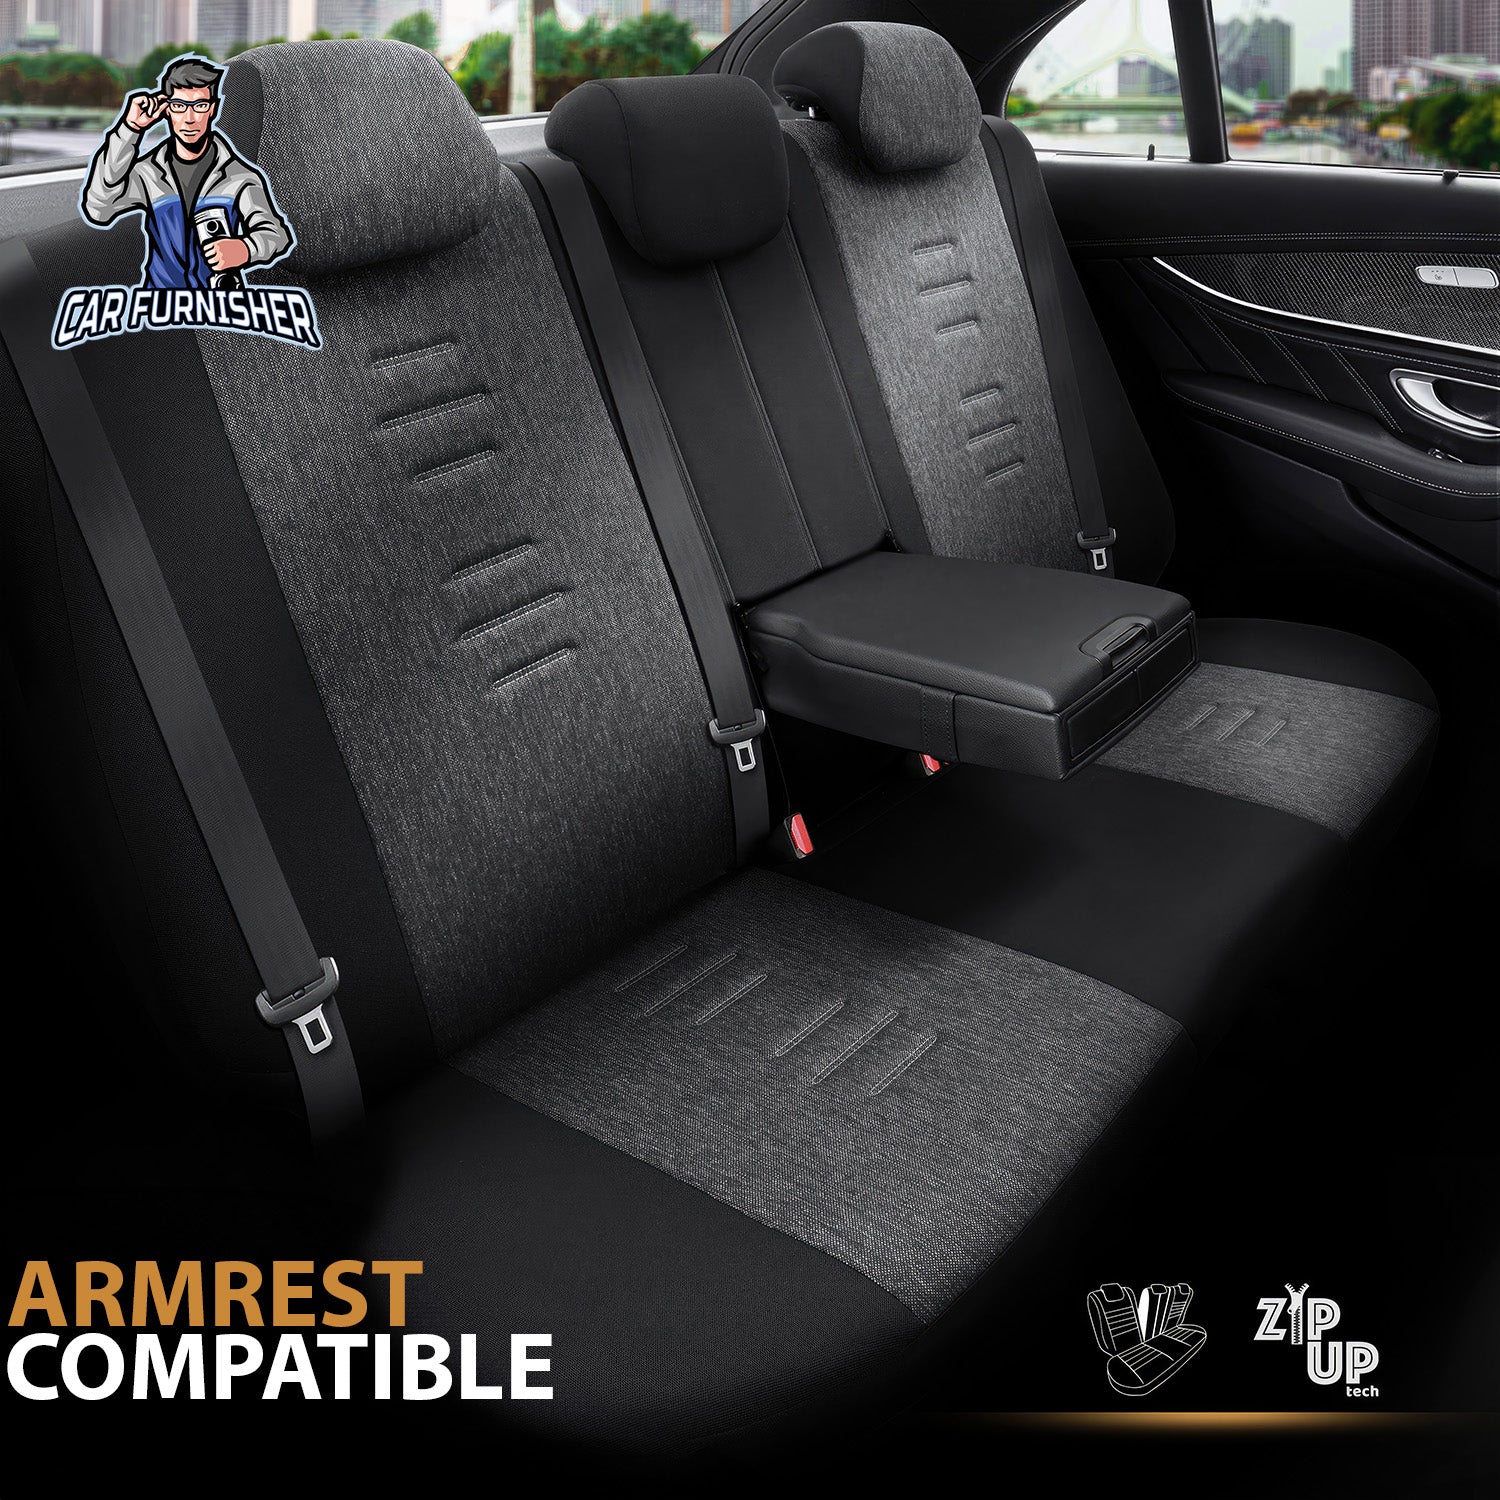 Car Seat Cover Set - Throne Design Smoked 5 Seats + Headrests (Full Set) Leather & Linen Fabric